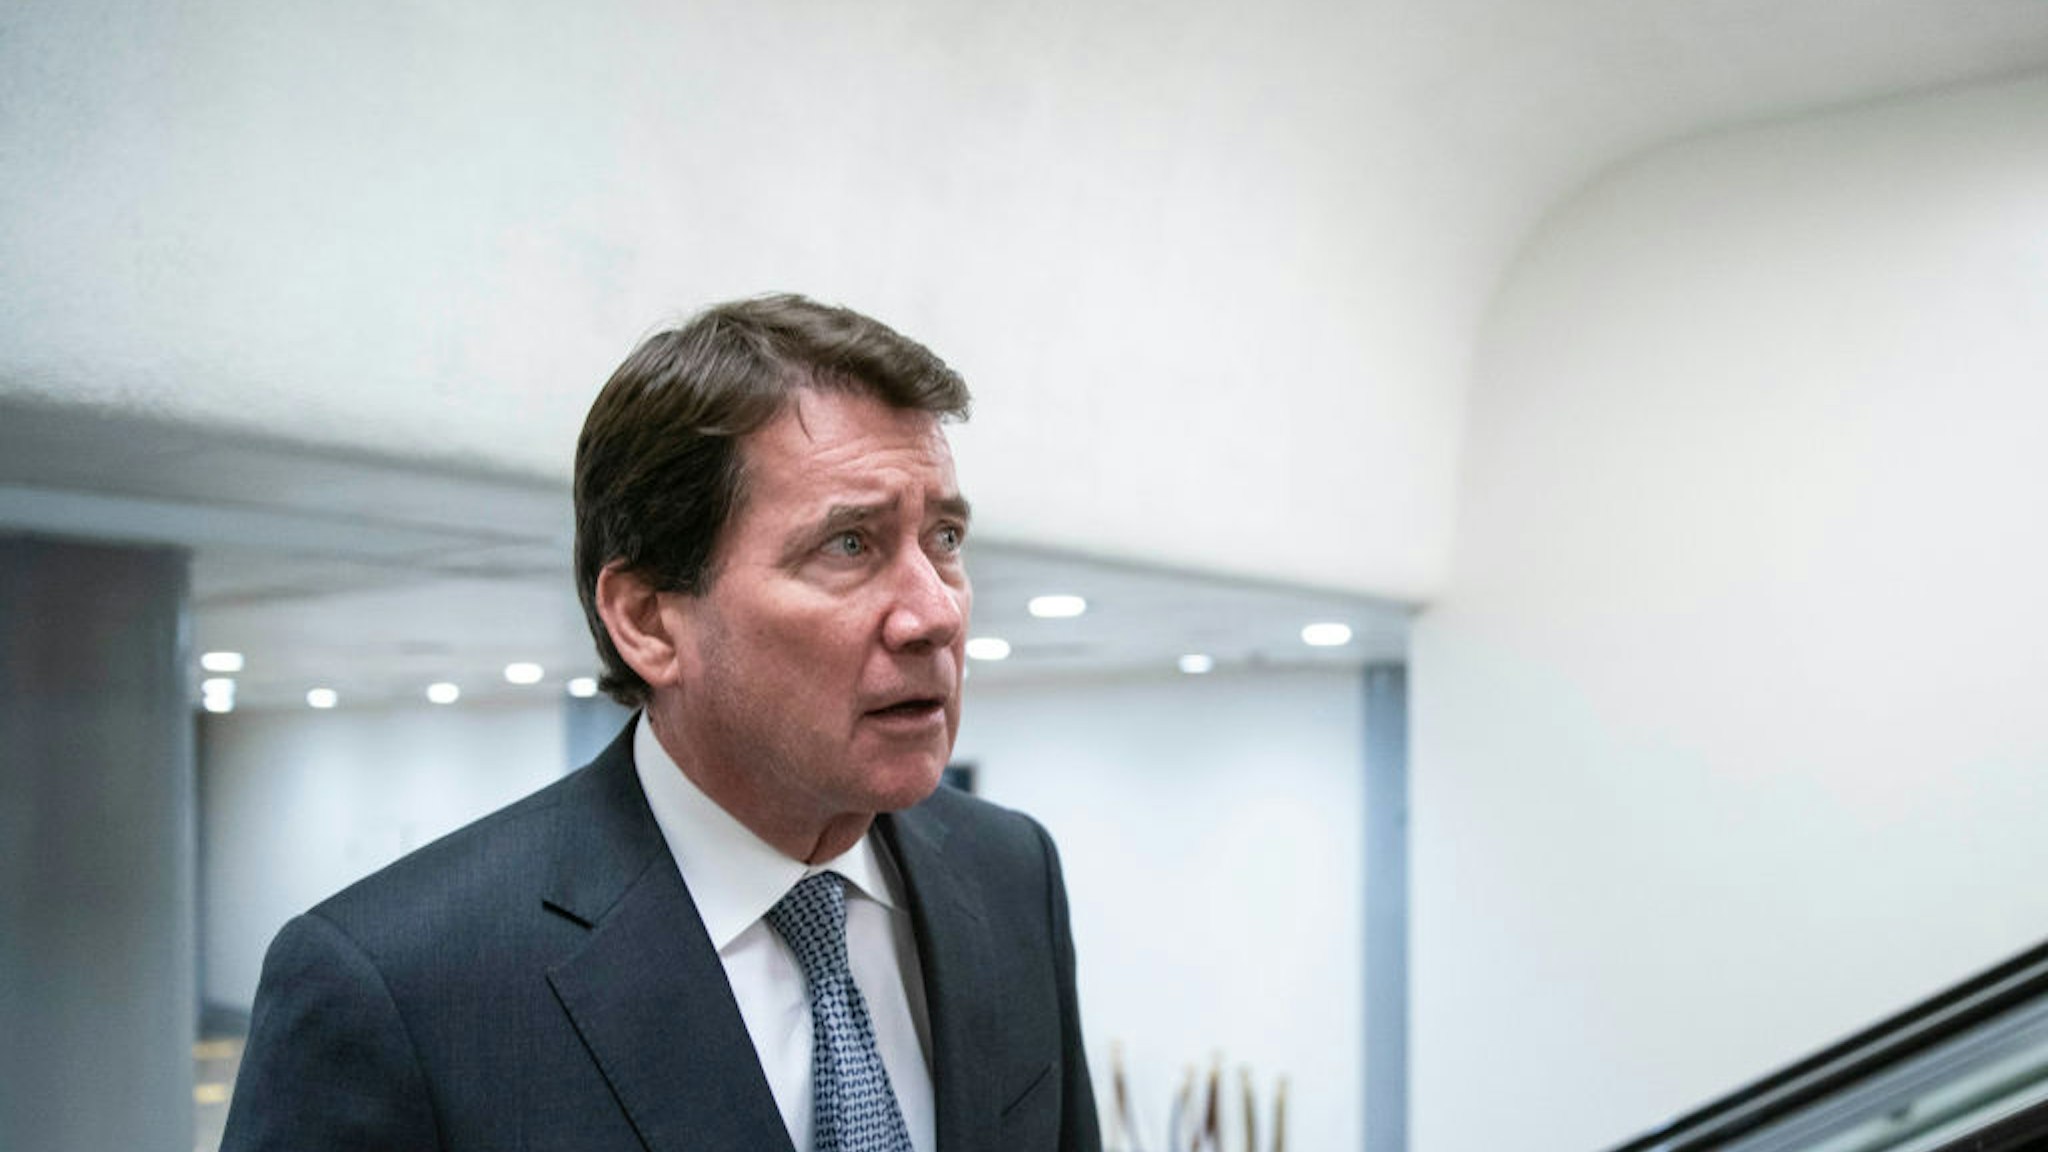 WASHINGTON, DC - AUGUST 07: Senator Bill Hagerty (R-TN) walks through the Senate Subway to the Senate floor at the U.S. Capitol on August 7, 2021 in Washington, DC. The Senate will vote on the nomination of Eunice C. Lee to be a U.S. Circuit Judge for the Second Circuit. The Senate will also vote on amendments for the legislative text of the $1 trillion infrastructure bill ahead of August recess.